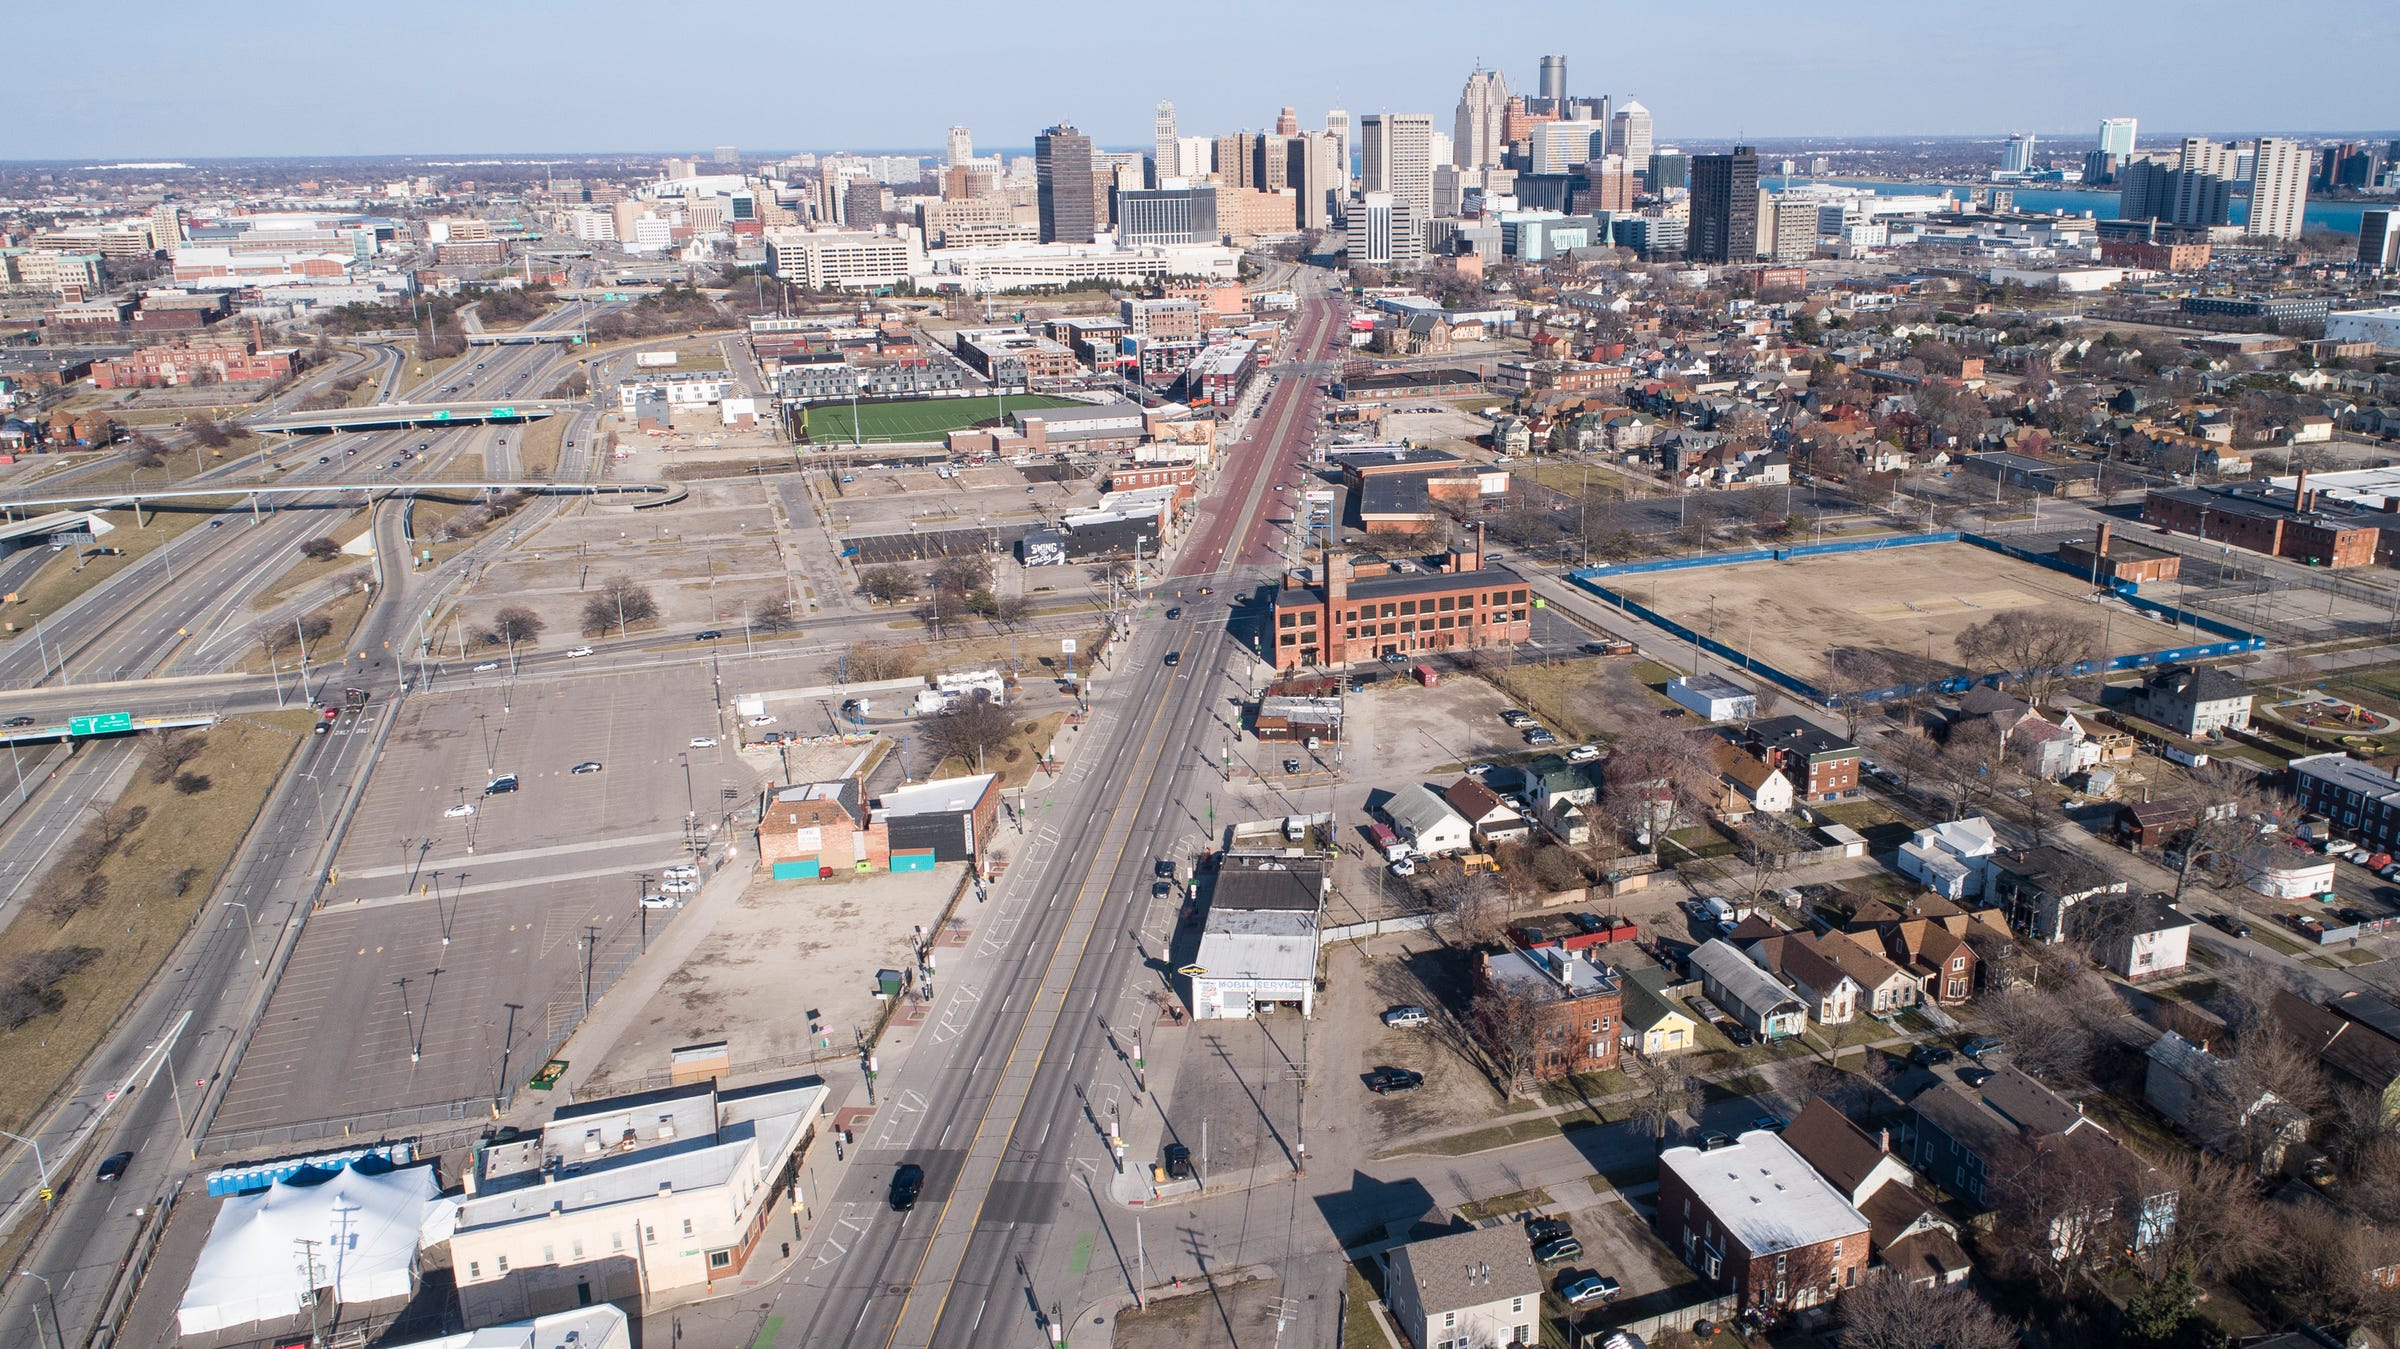 It is rush hour and St. Patrick's Day, but both Michigan Avenue through Corktown, the traditional party center on the Irish holiday, and I-75 are nearly empty as people stay home during the coronavirus crisis